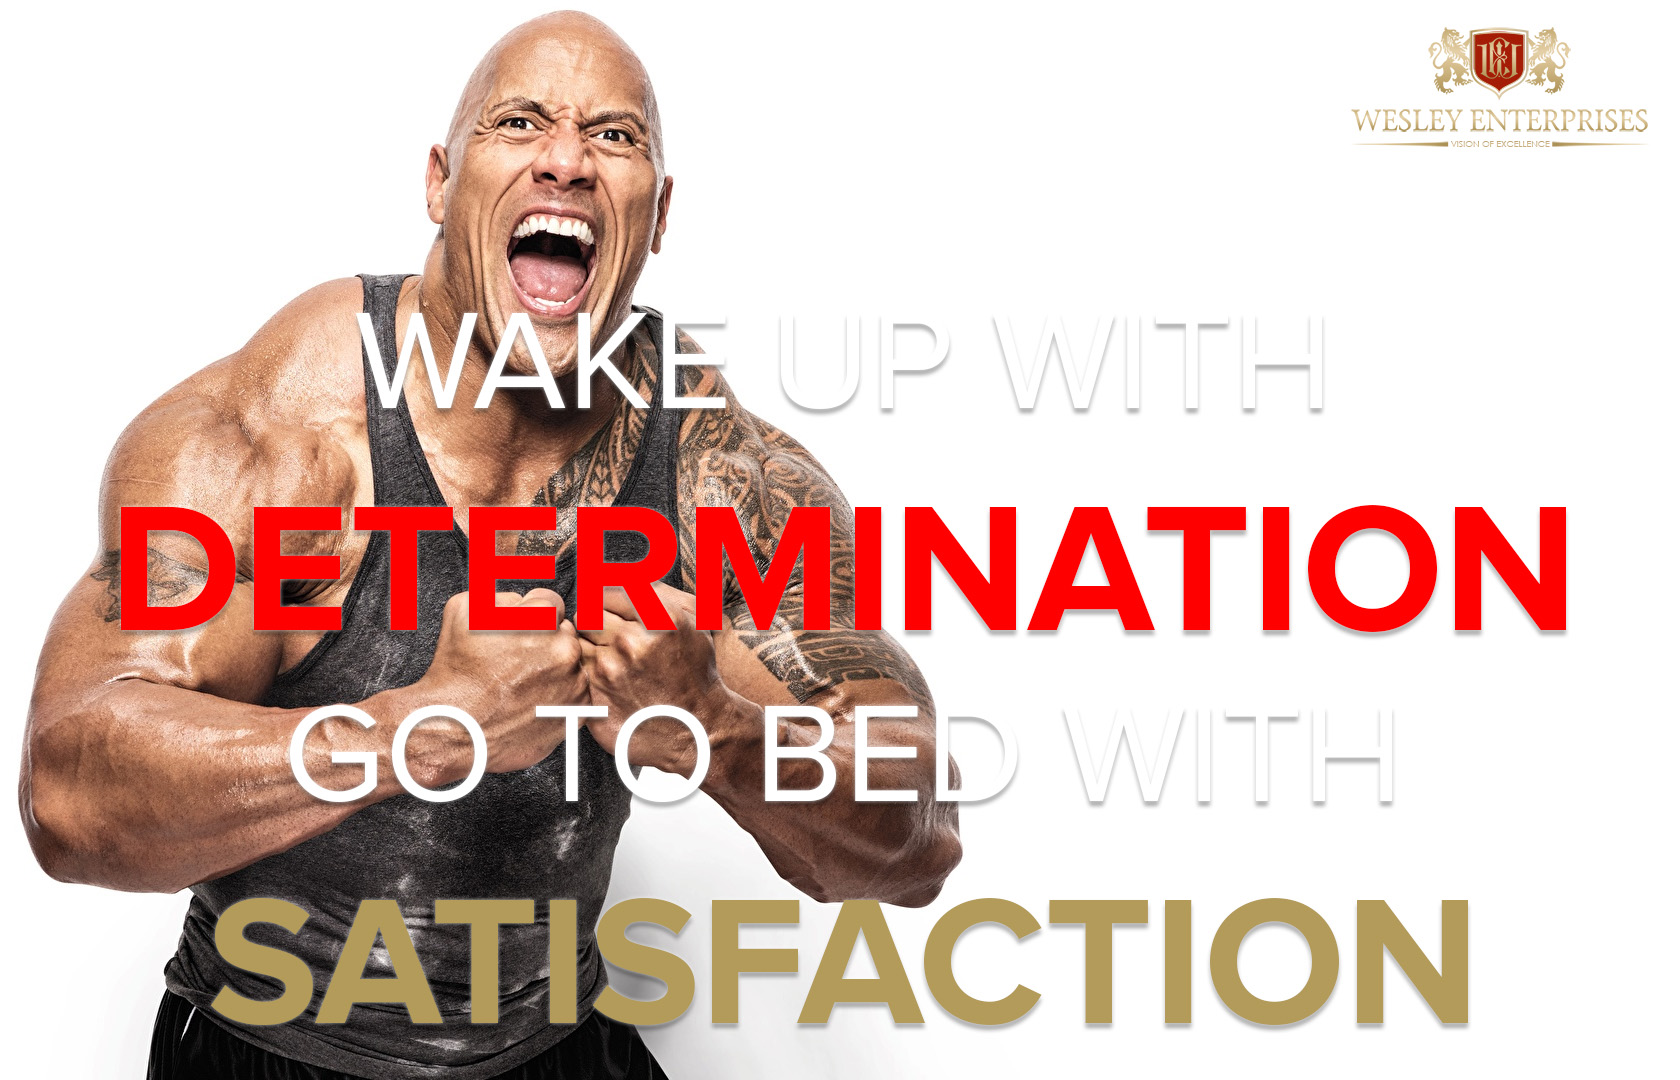 Wake up with determination